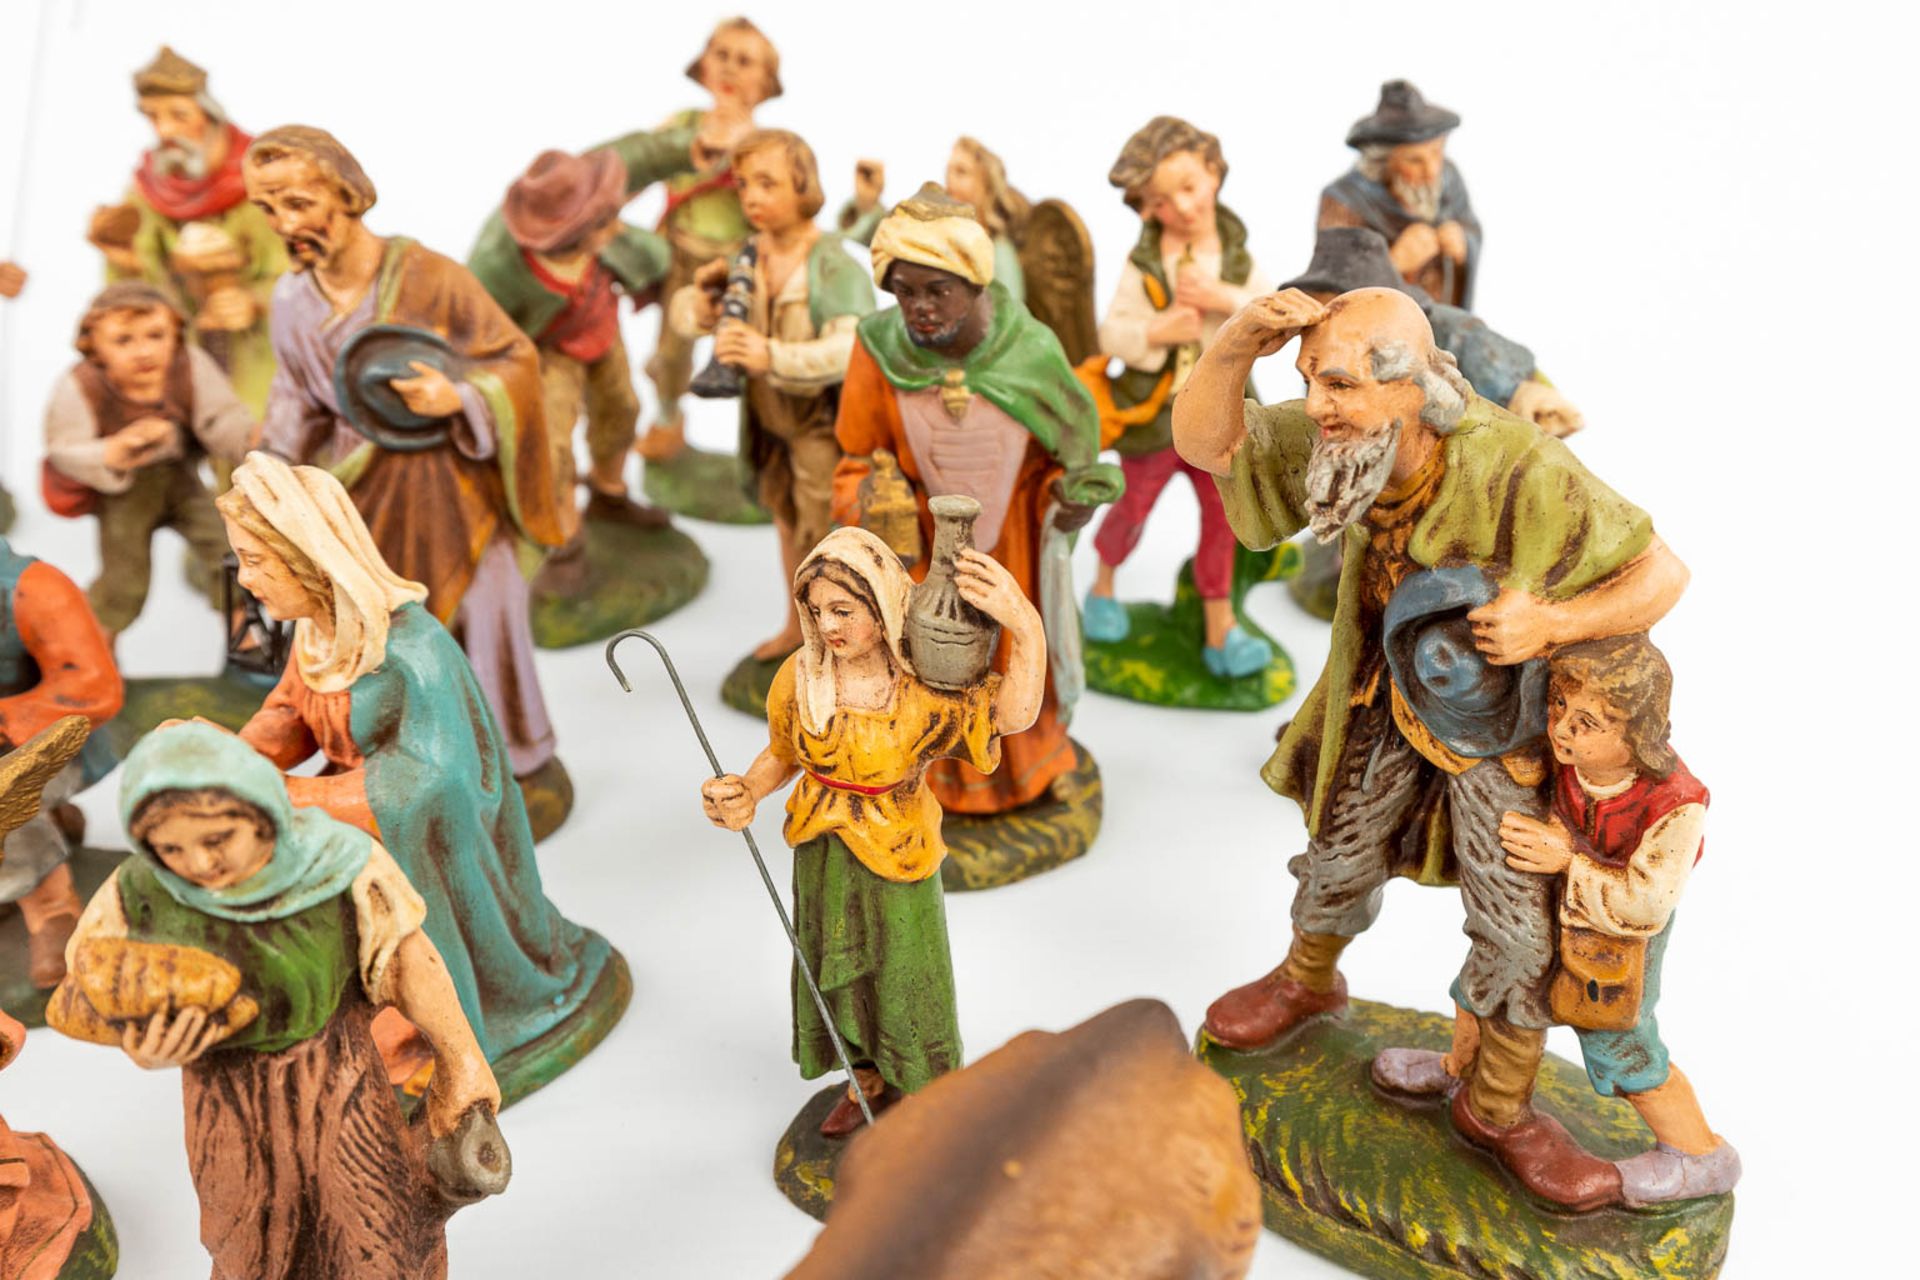 A large and extended Nativity scene with figurines and animals made of papier maché. - Image 20 of 20